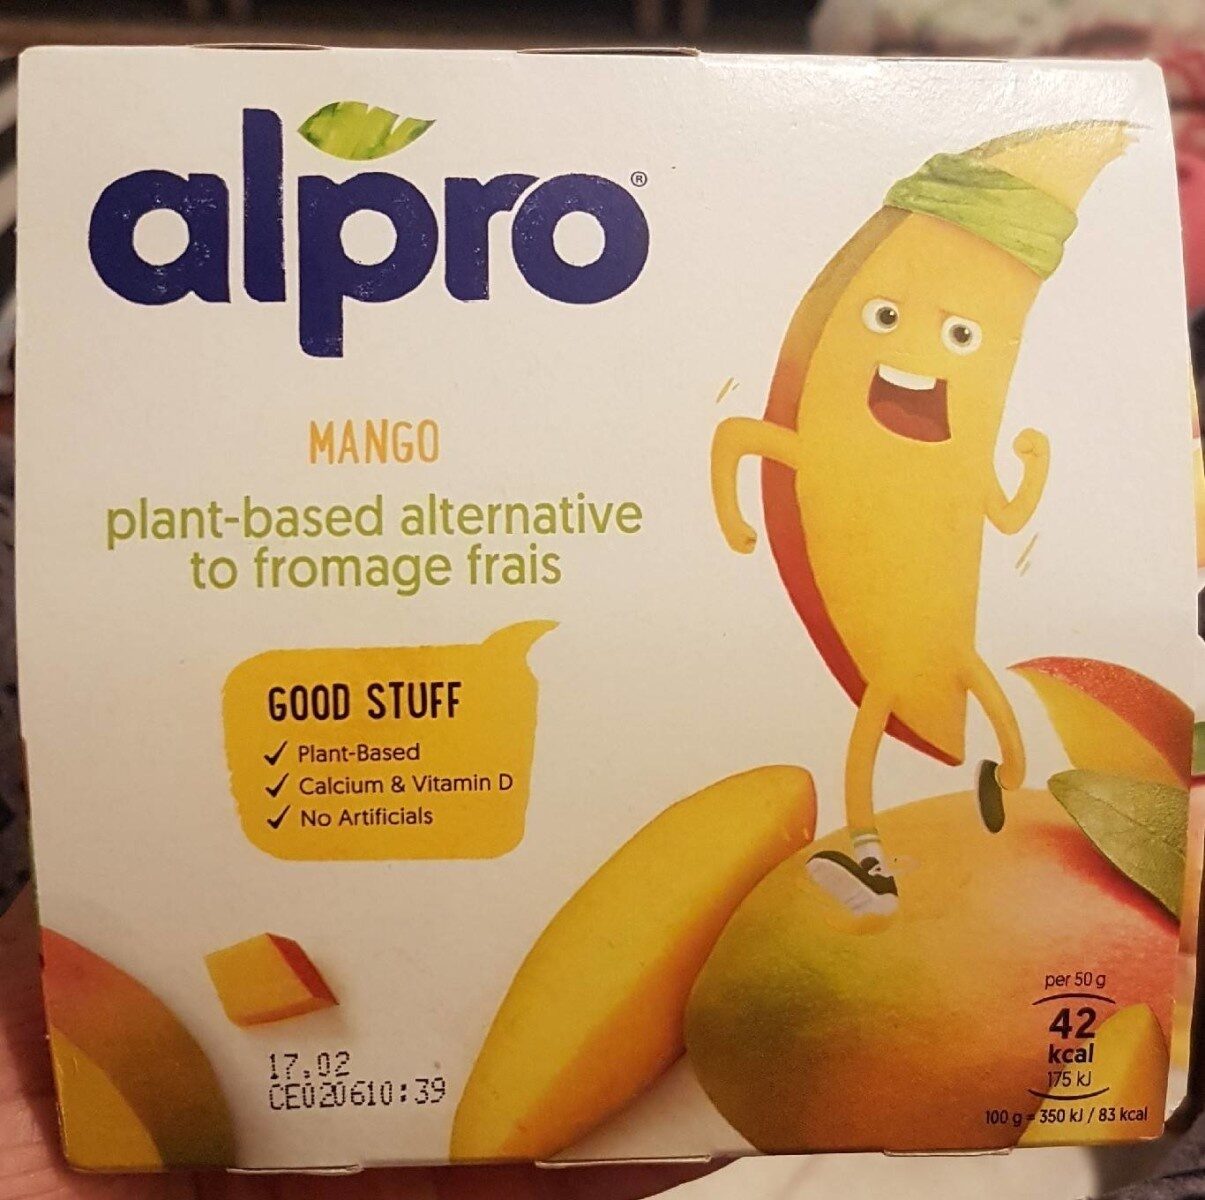 Mango plant-based alternative to fromage frais - Product